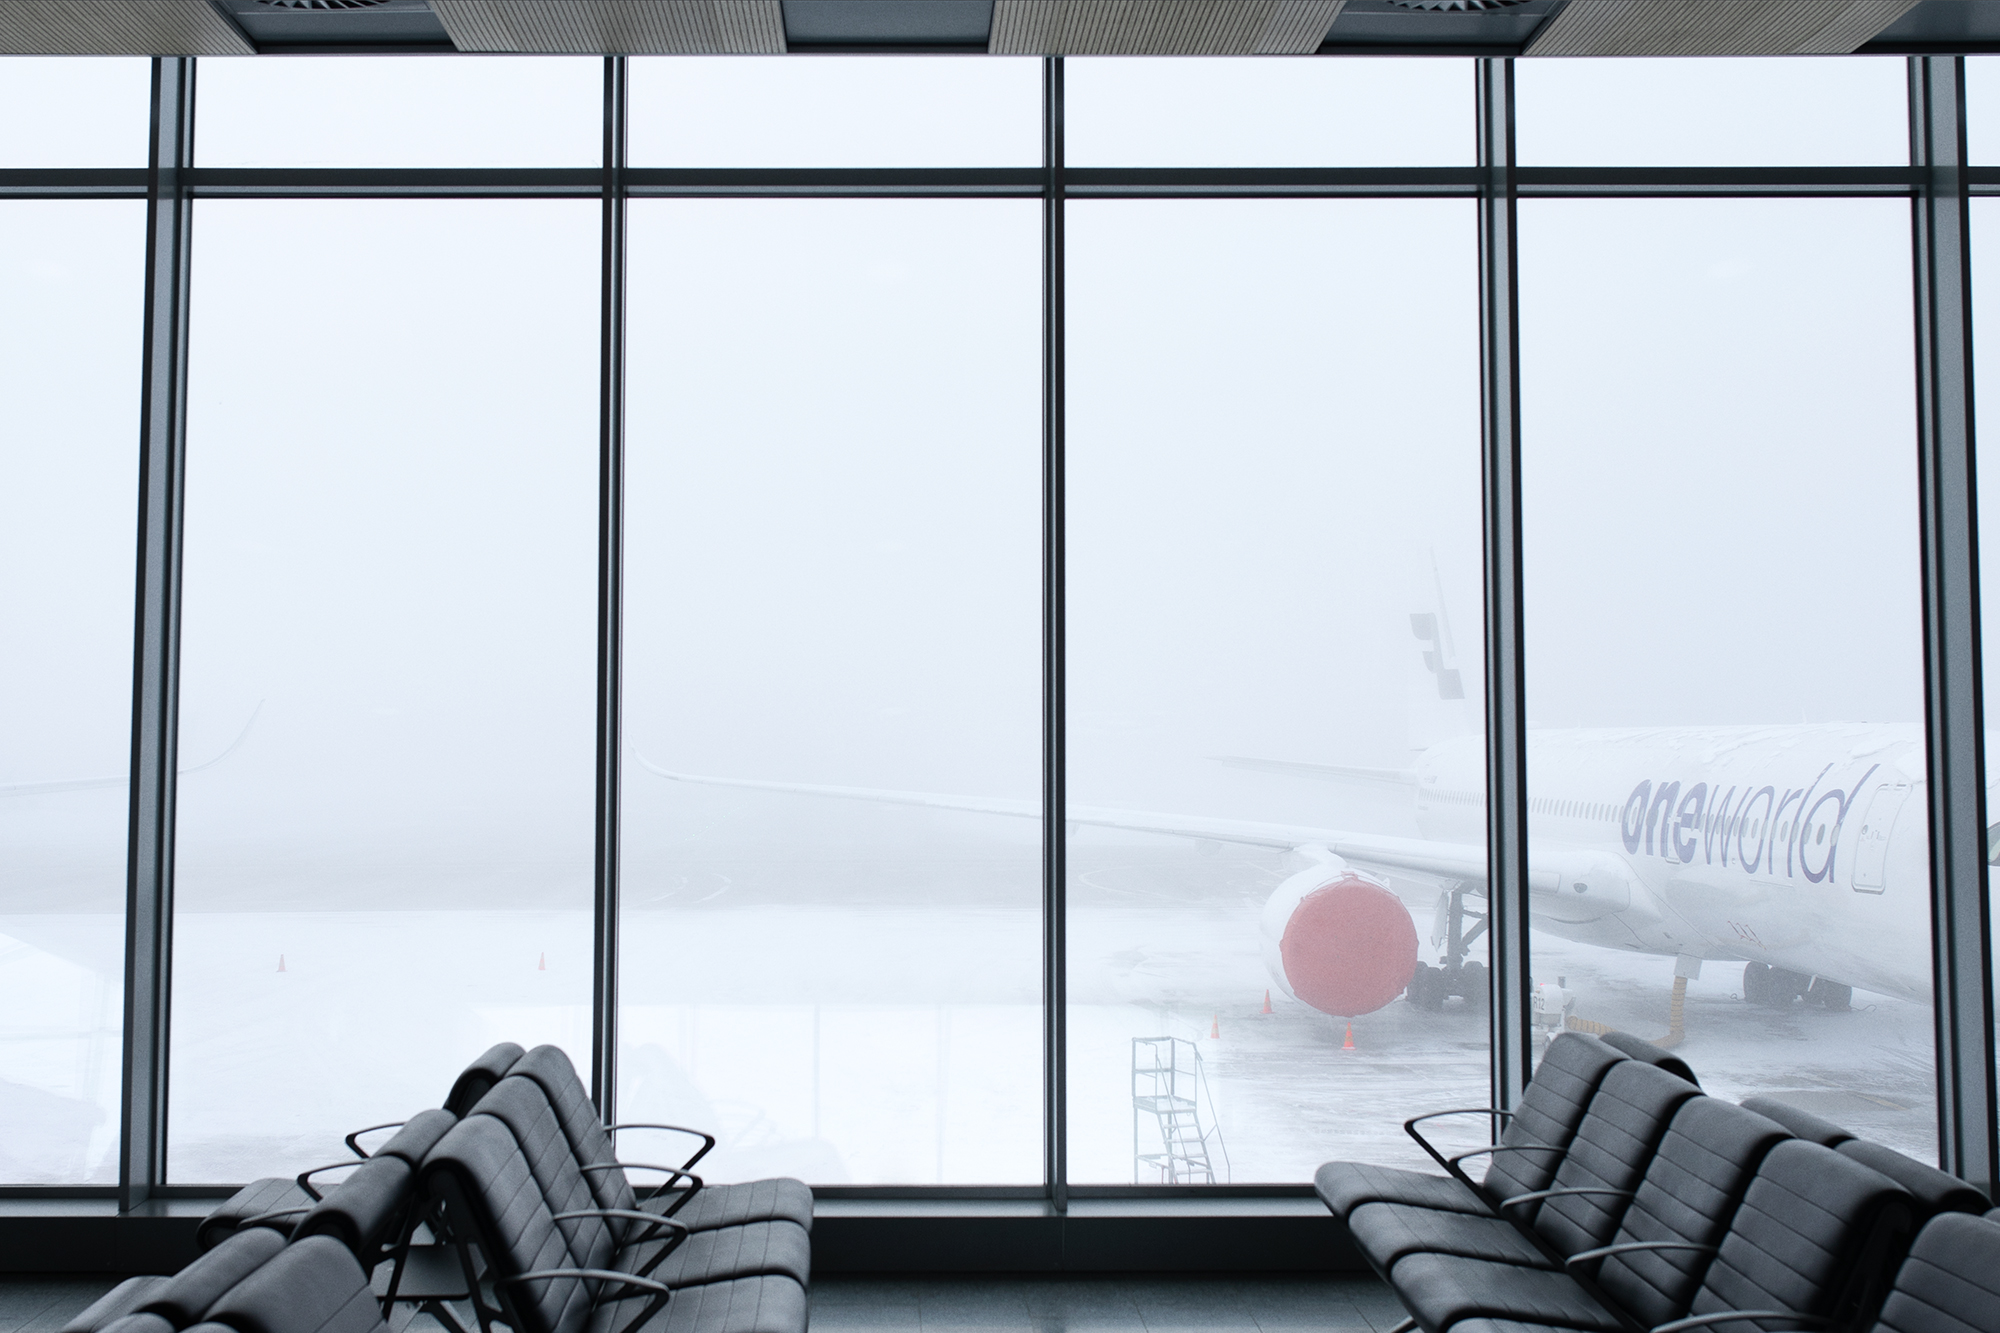 Illustration, benches at an airport and an airplane wing behind the window.